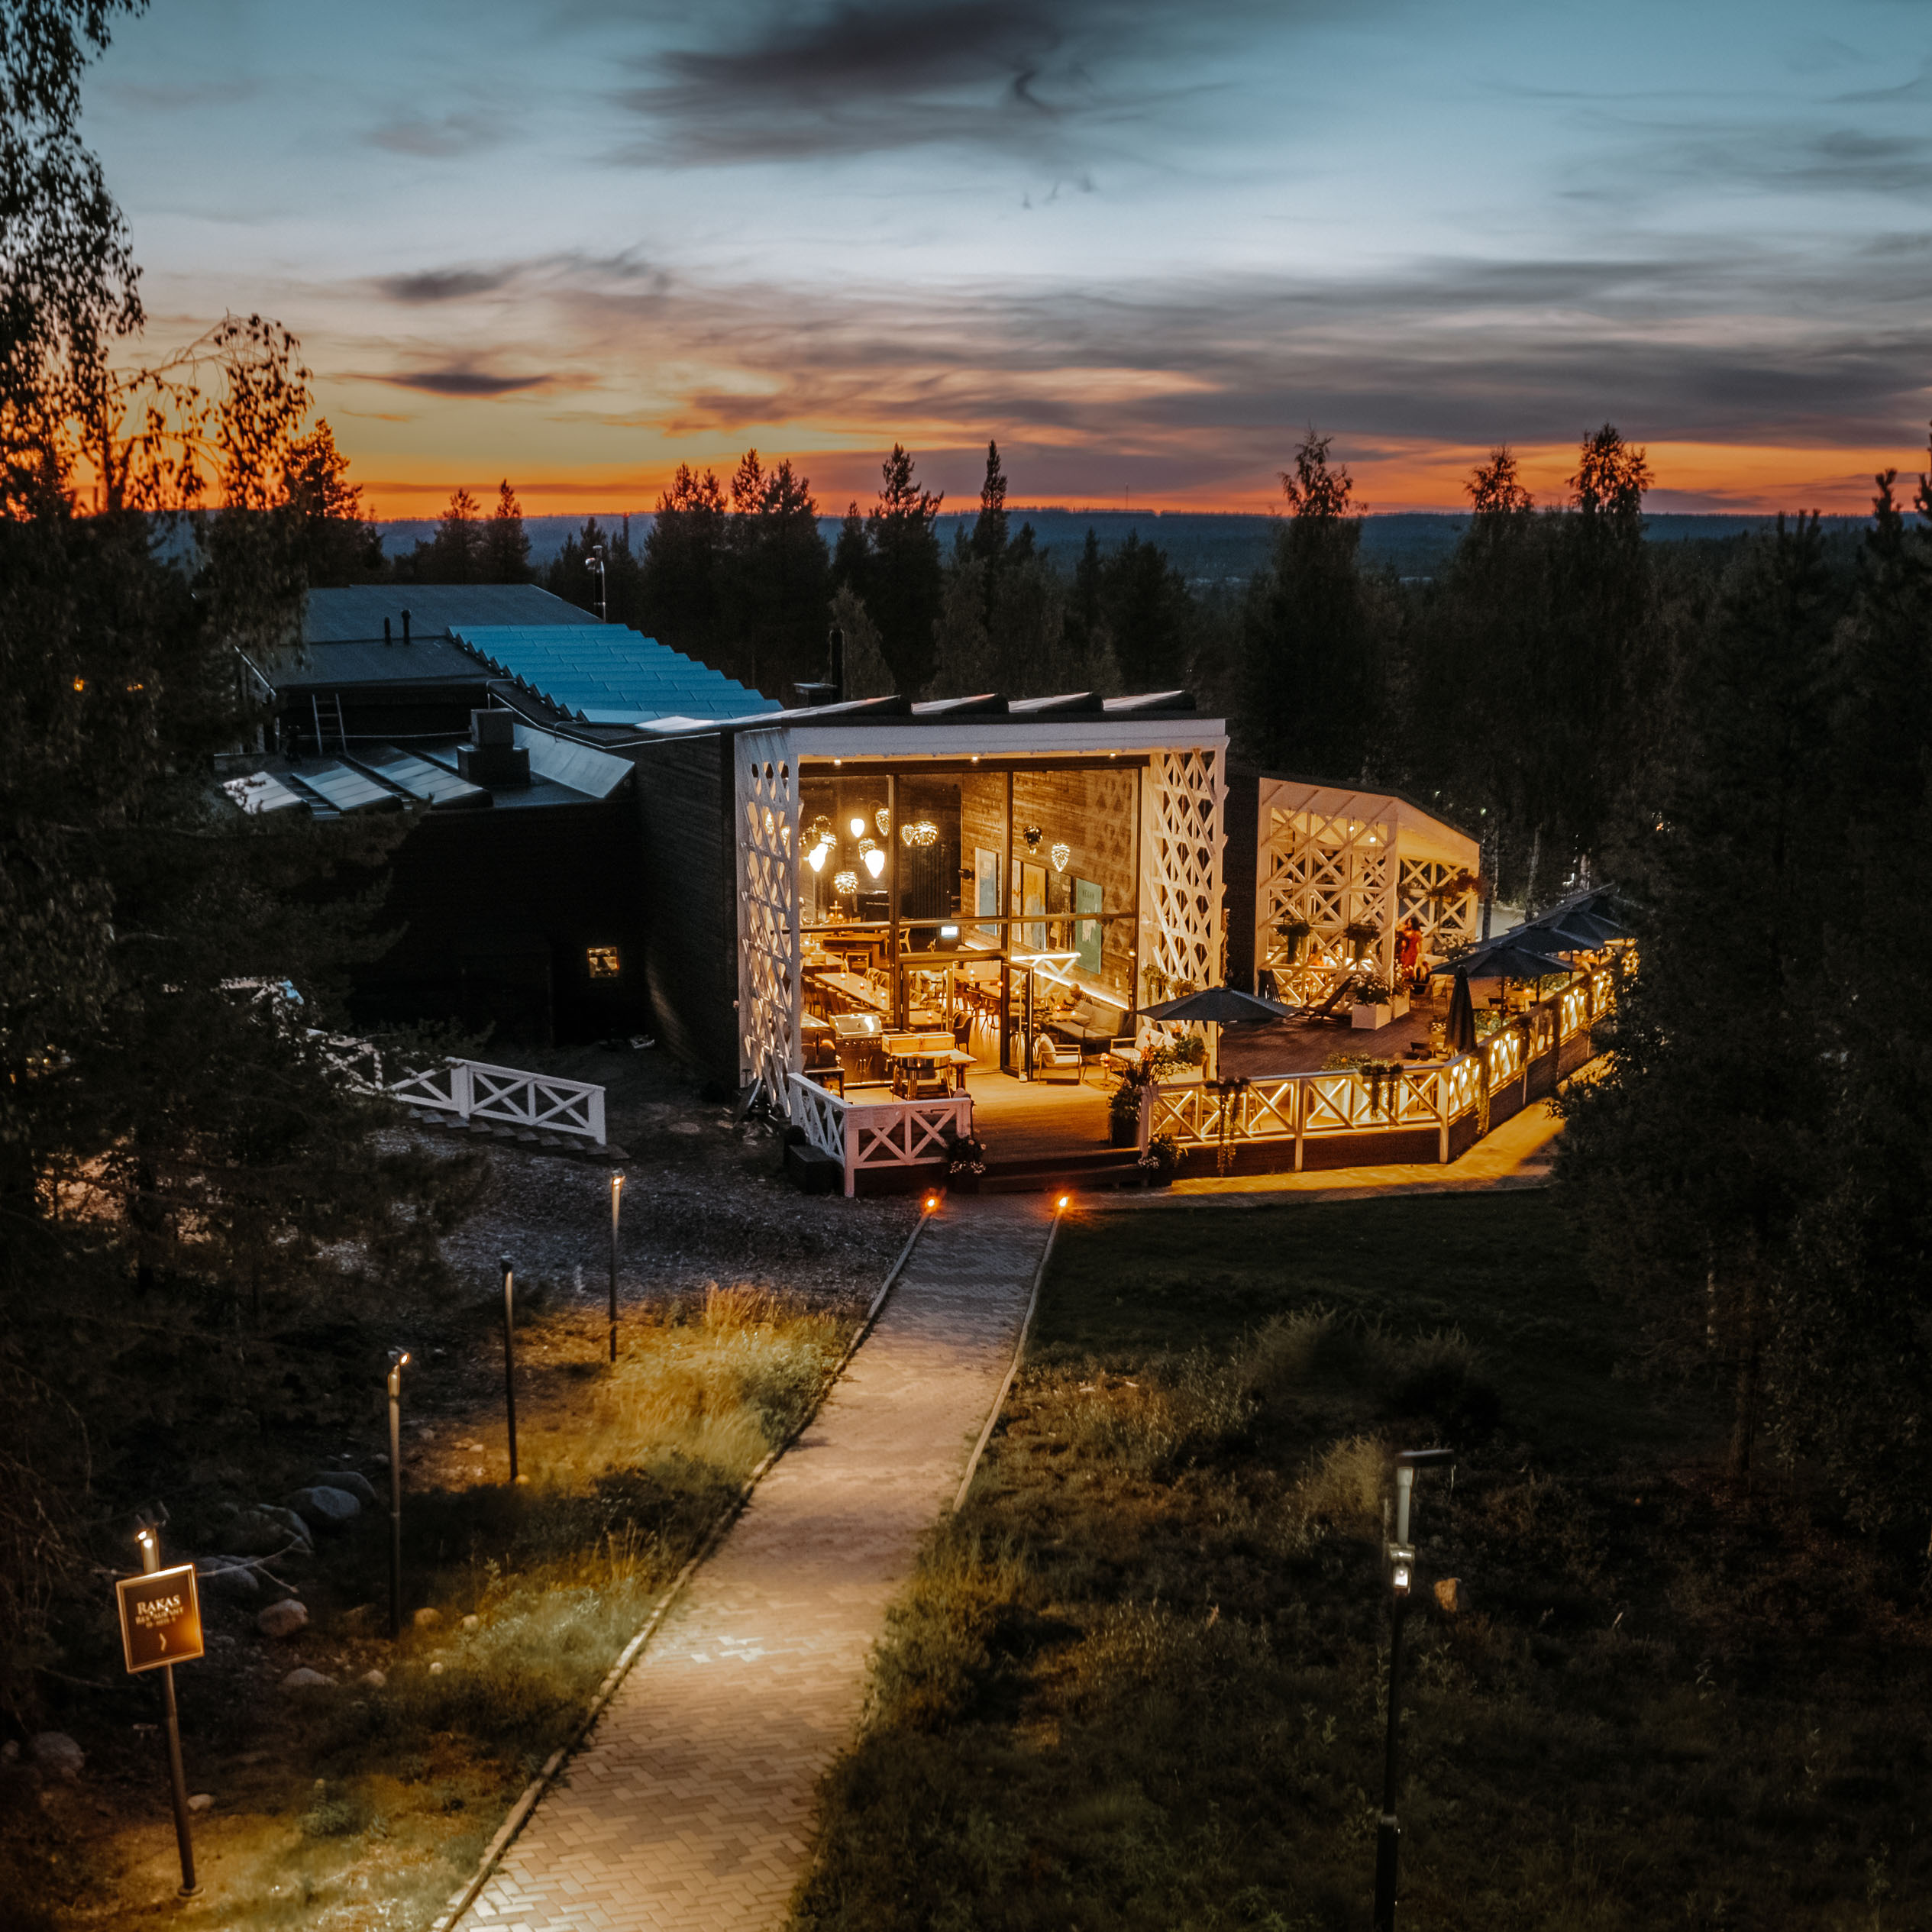 Design restaurant Rakas is located in the main building of Arctic TreeHouse Hotel